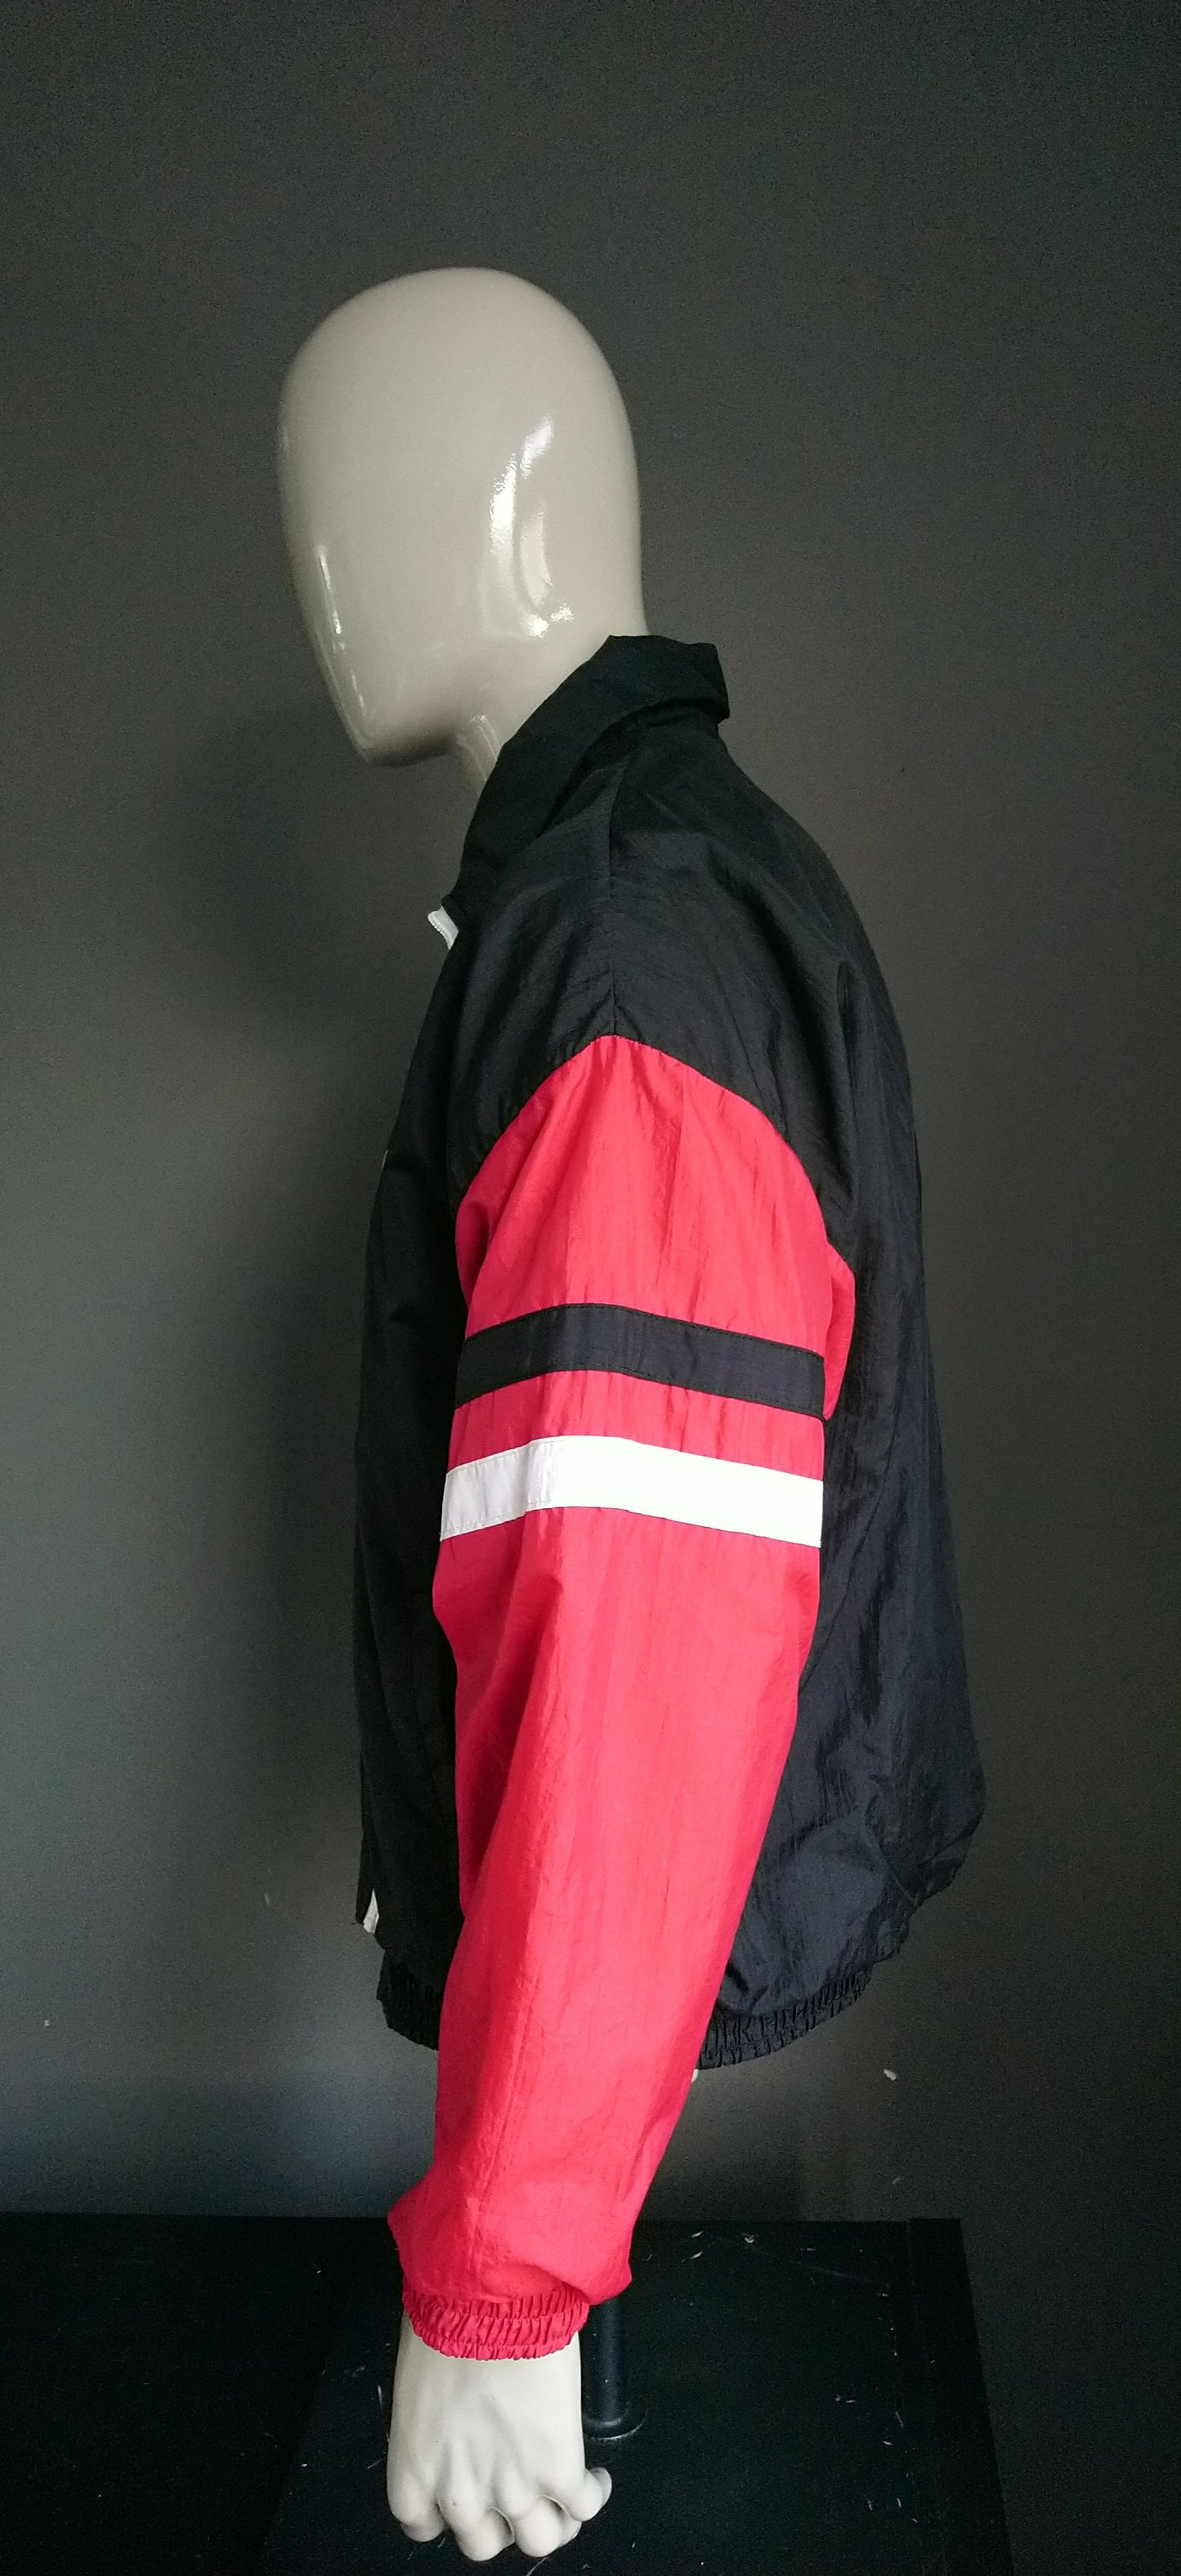 Vintage contender 80's - 90's sports jacket. Red black and white colored. Size L / XL.